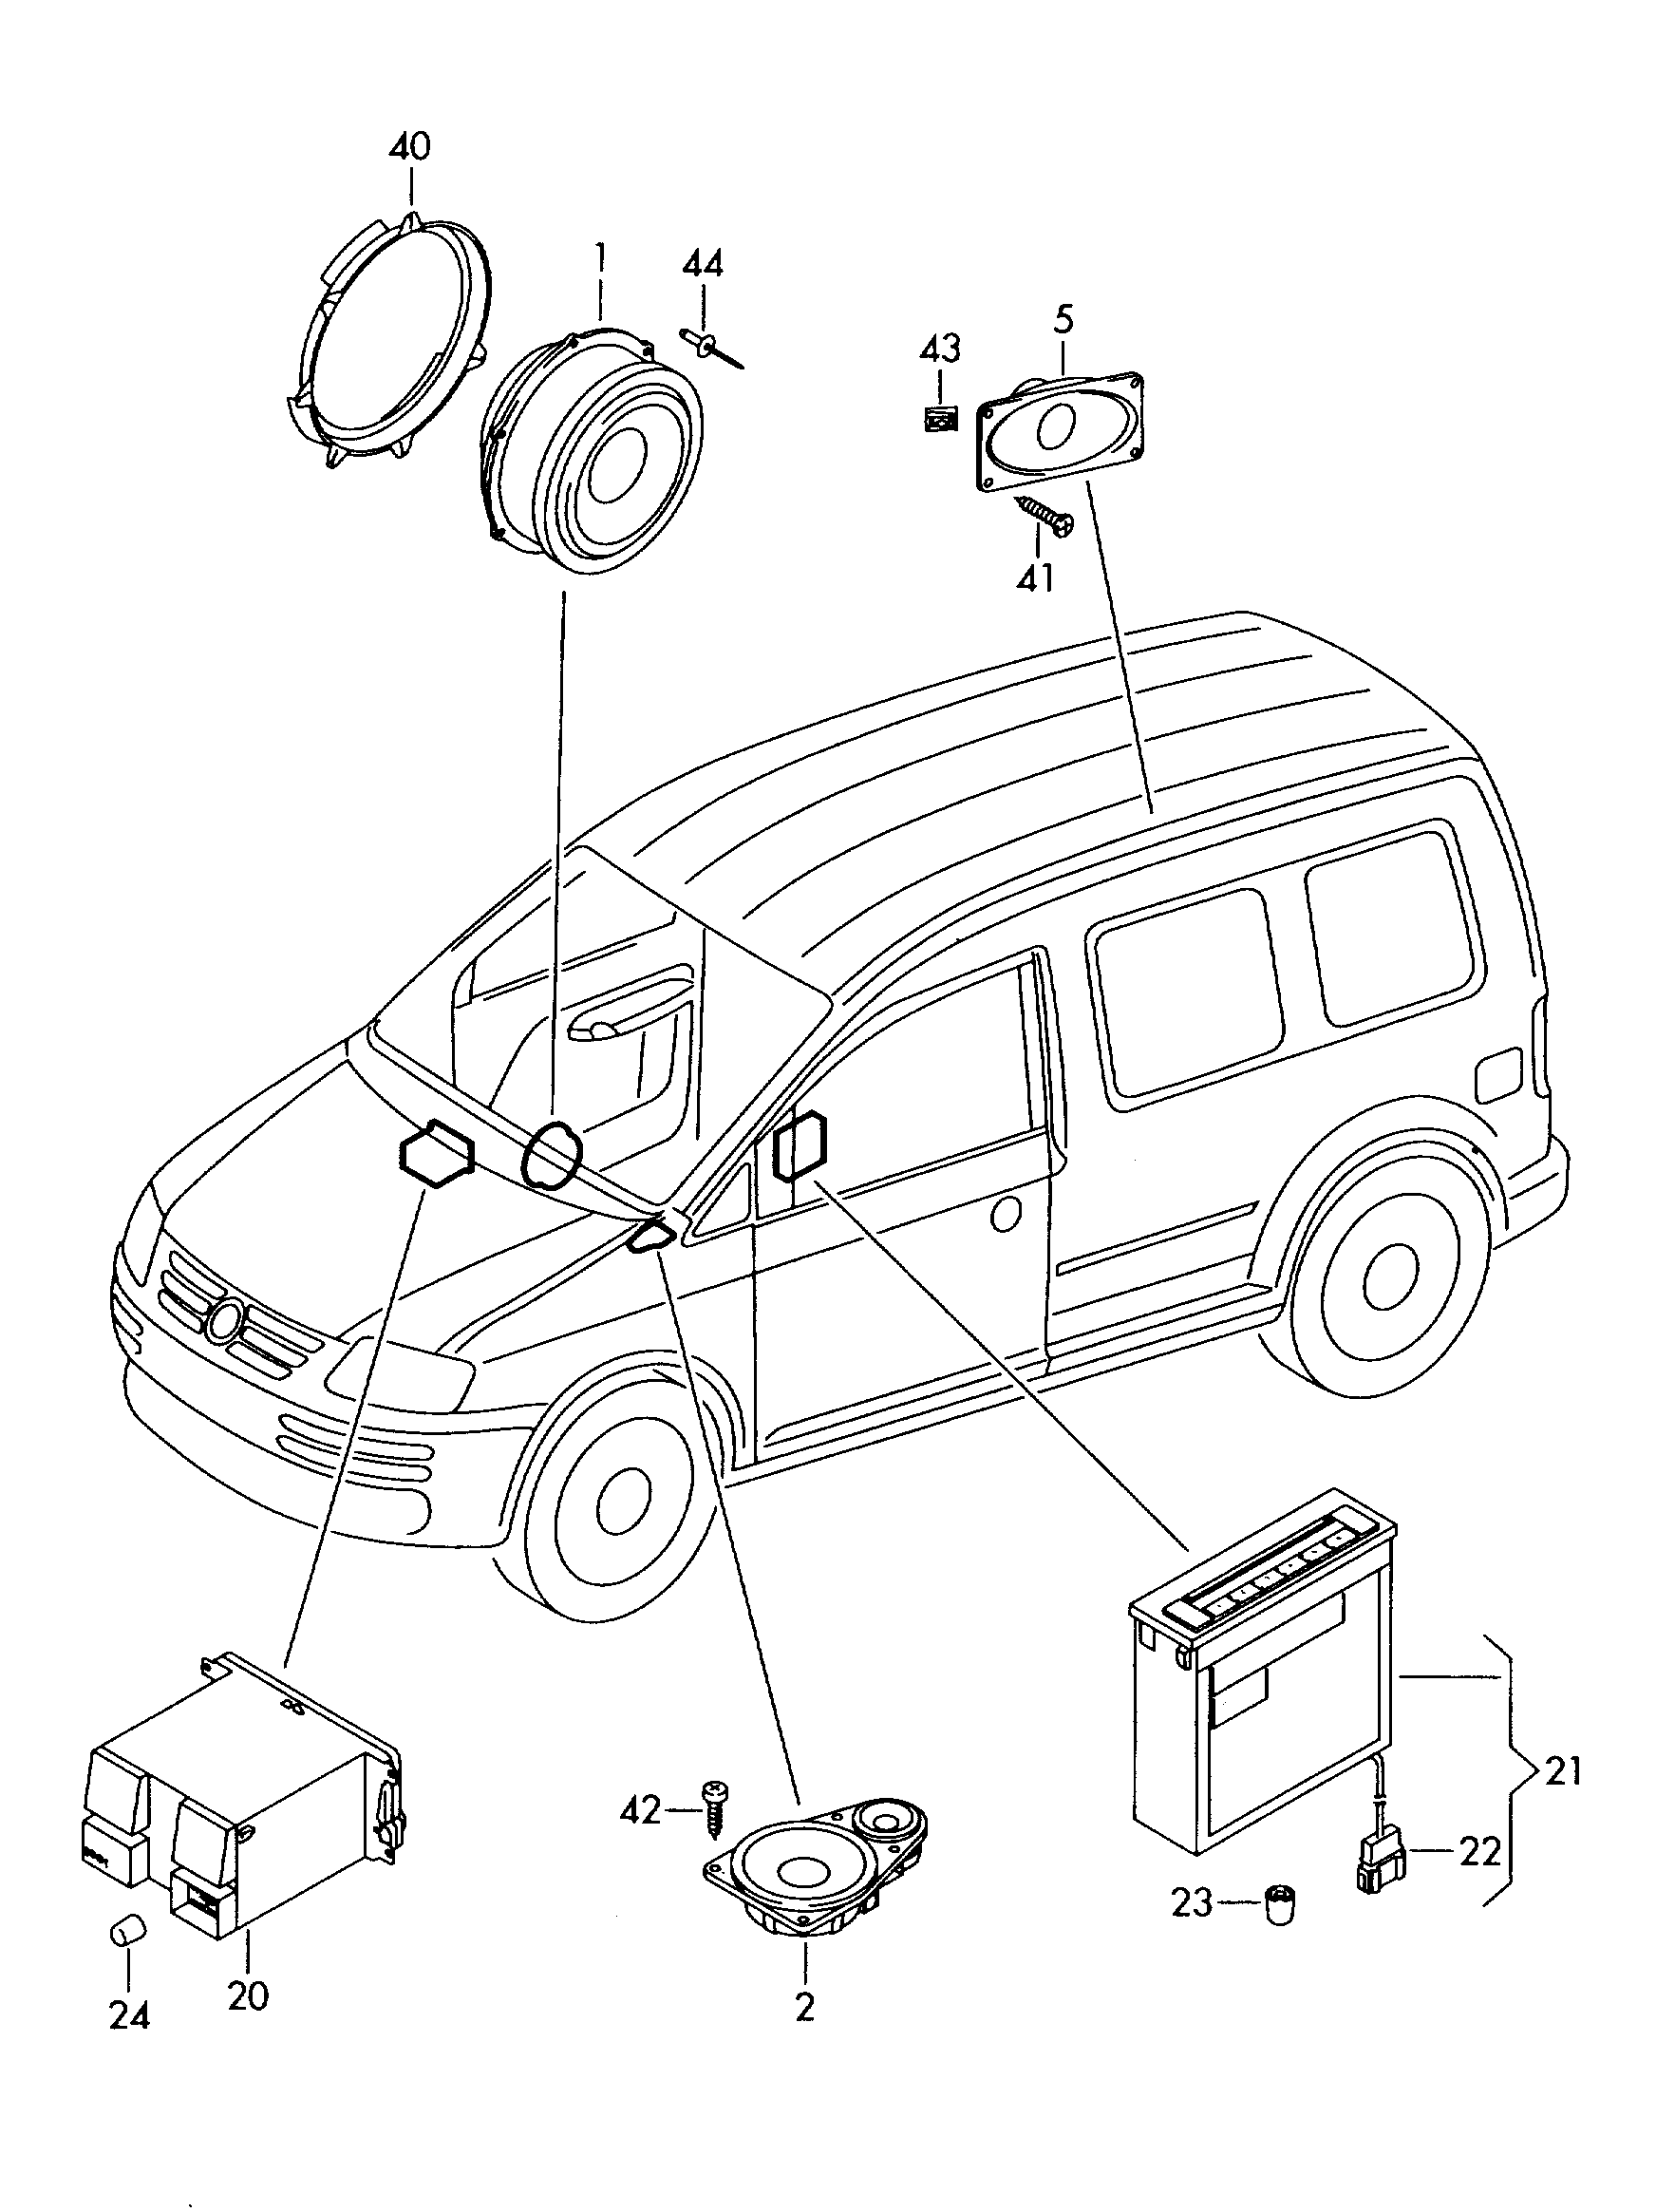 Attachment parts for<br>loudspeaker  - Caddy - cad